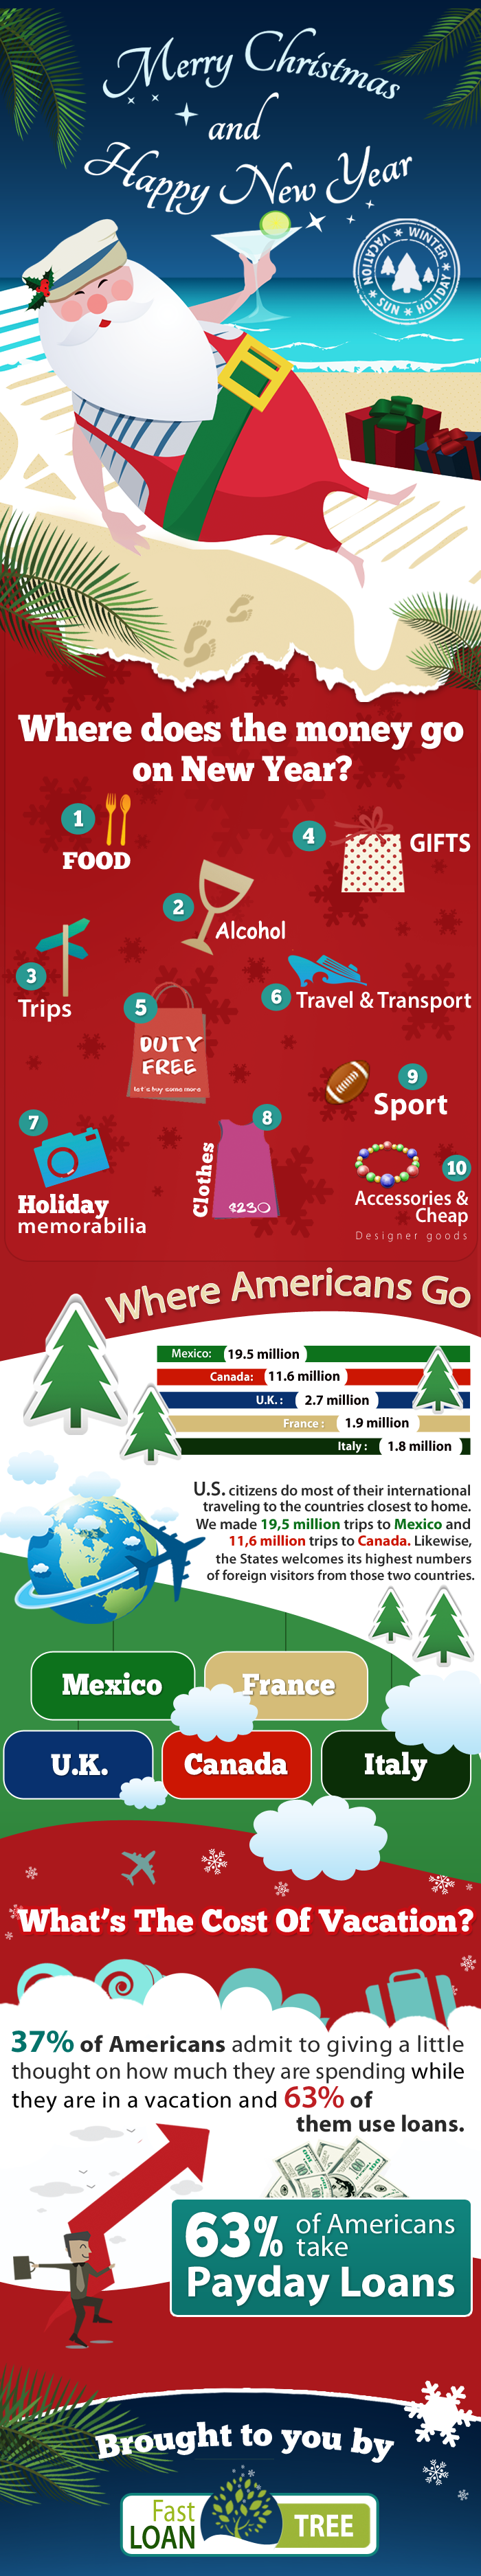 Top 10 Reasons holiday makers overspend --- Infographic